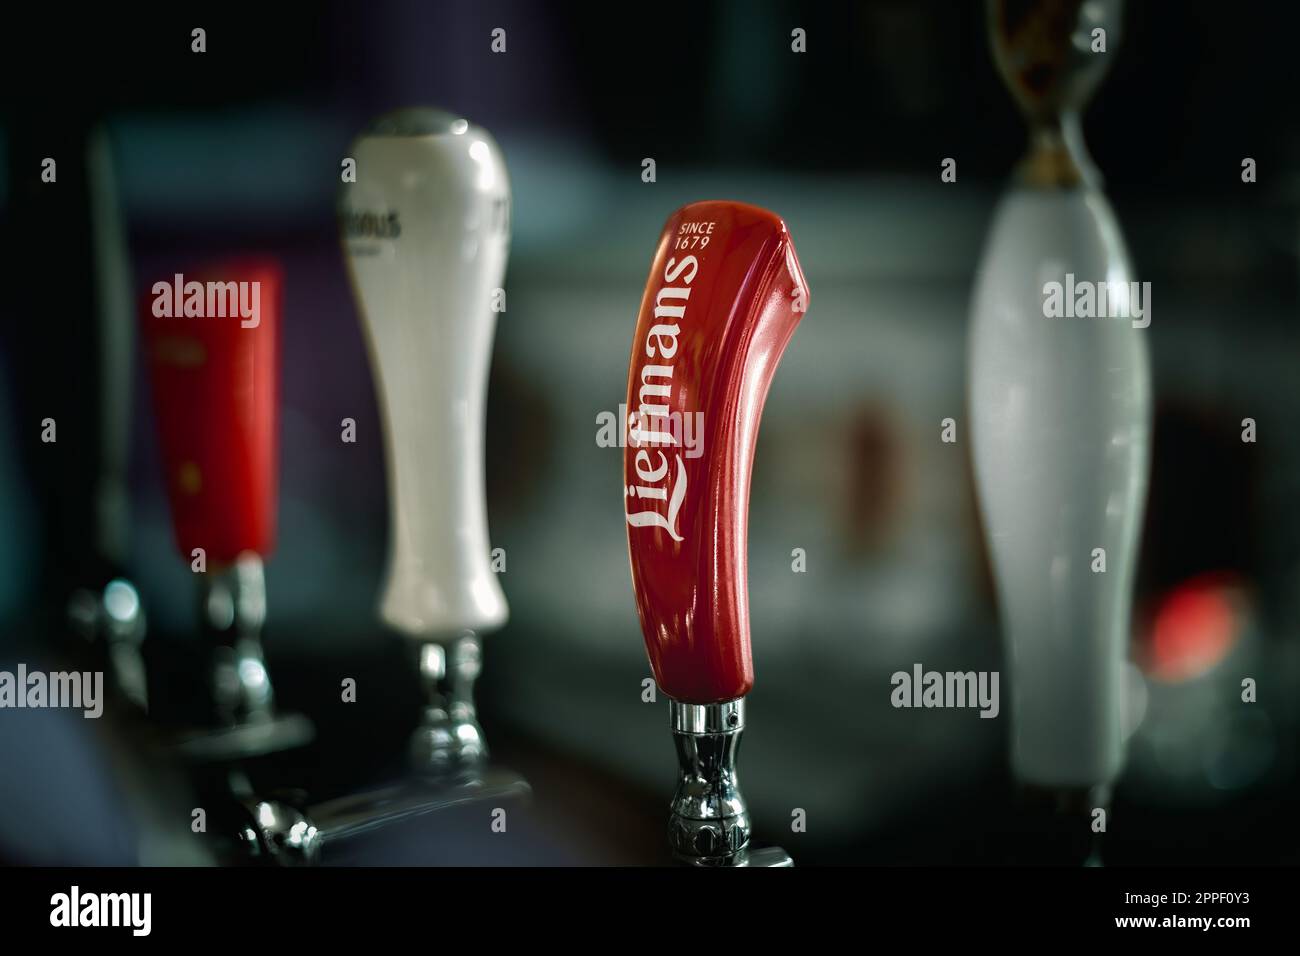 Handles of different brands of draft beer on a bar counter Stock Photo